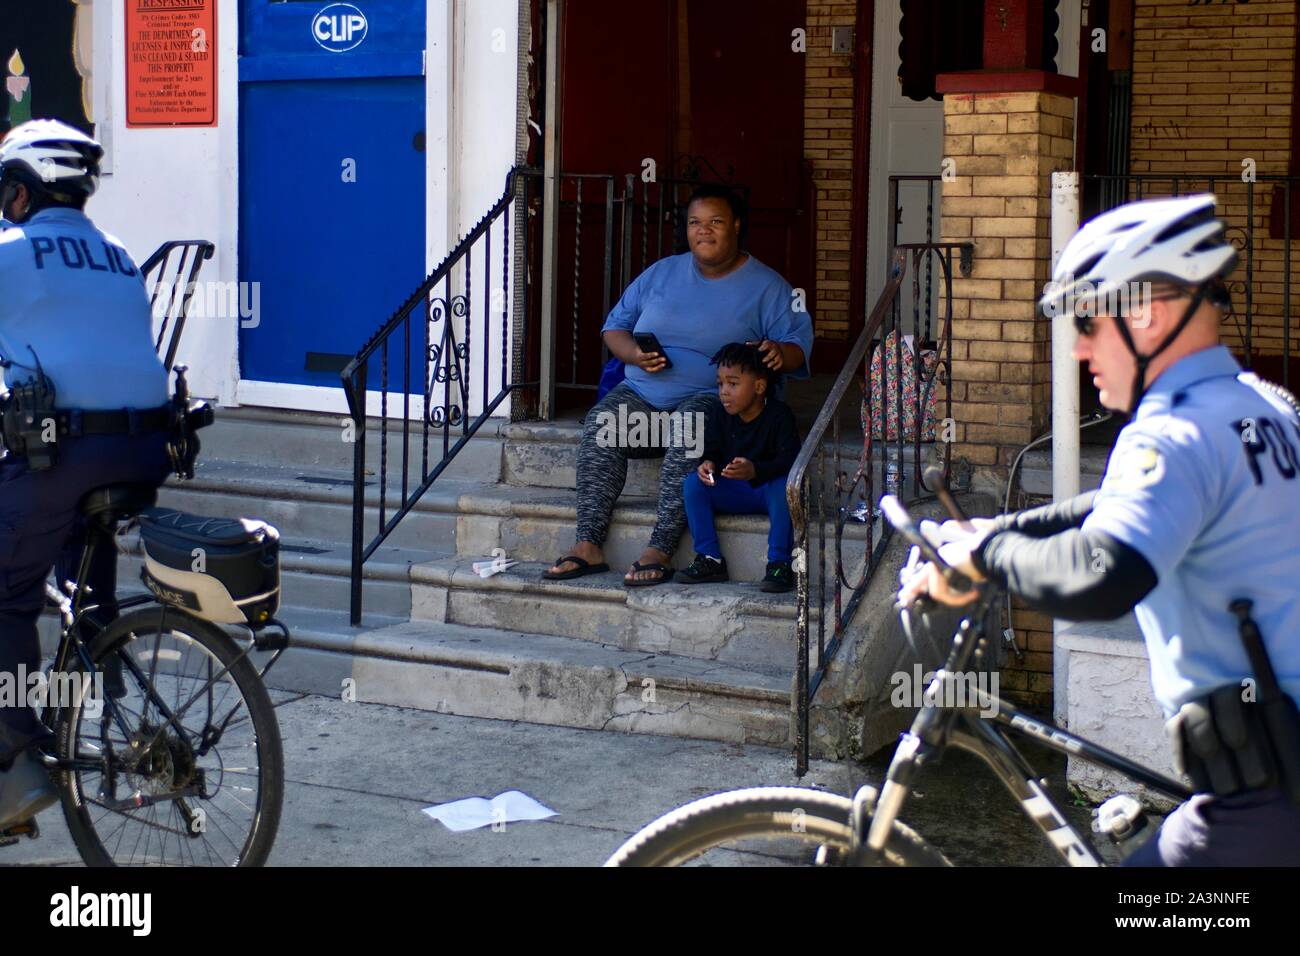 Direct neighbor Octavia Abney smiles as she watches from her stoop with son Dylan Abney, 4, when Police officers with a bike patrol unit depart after Stock Photo